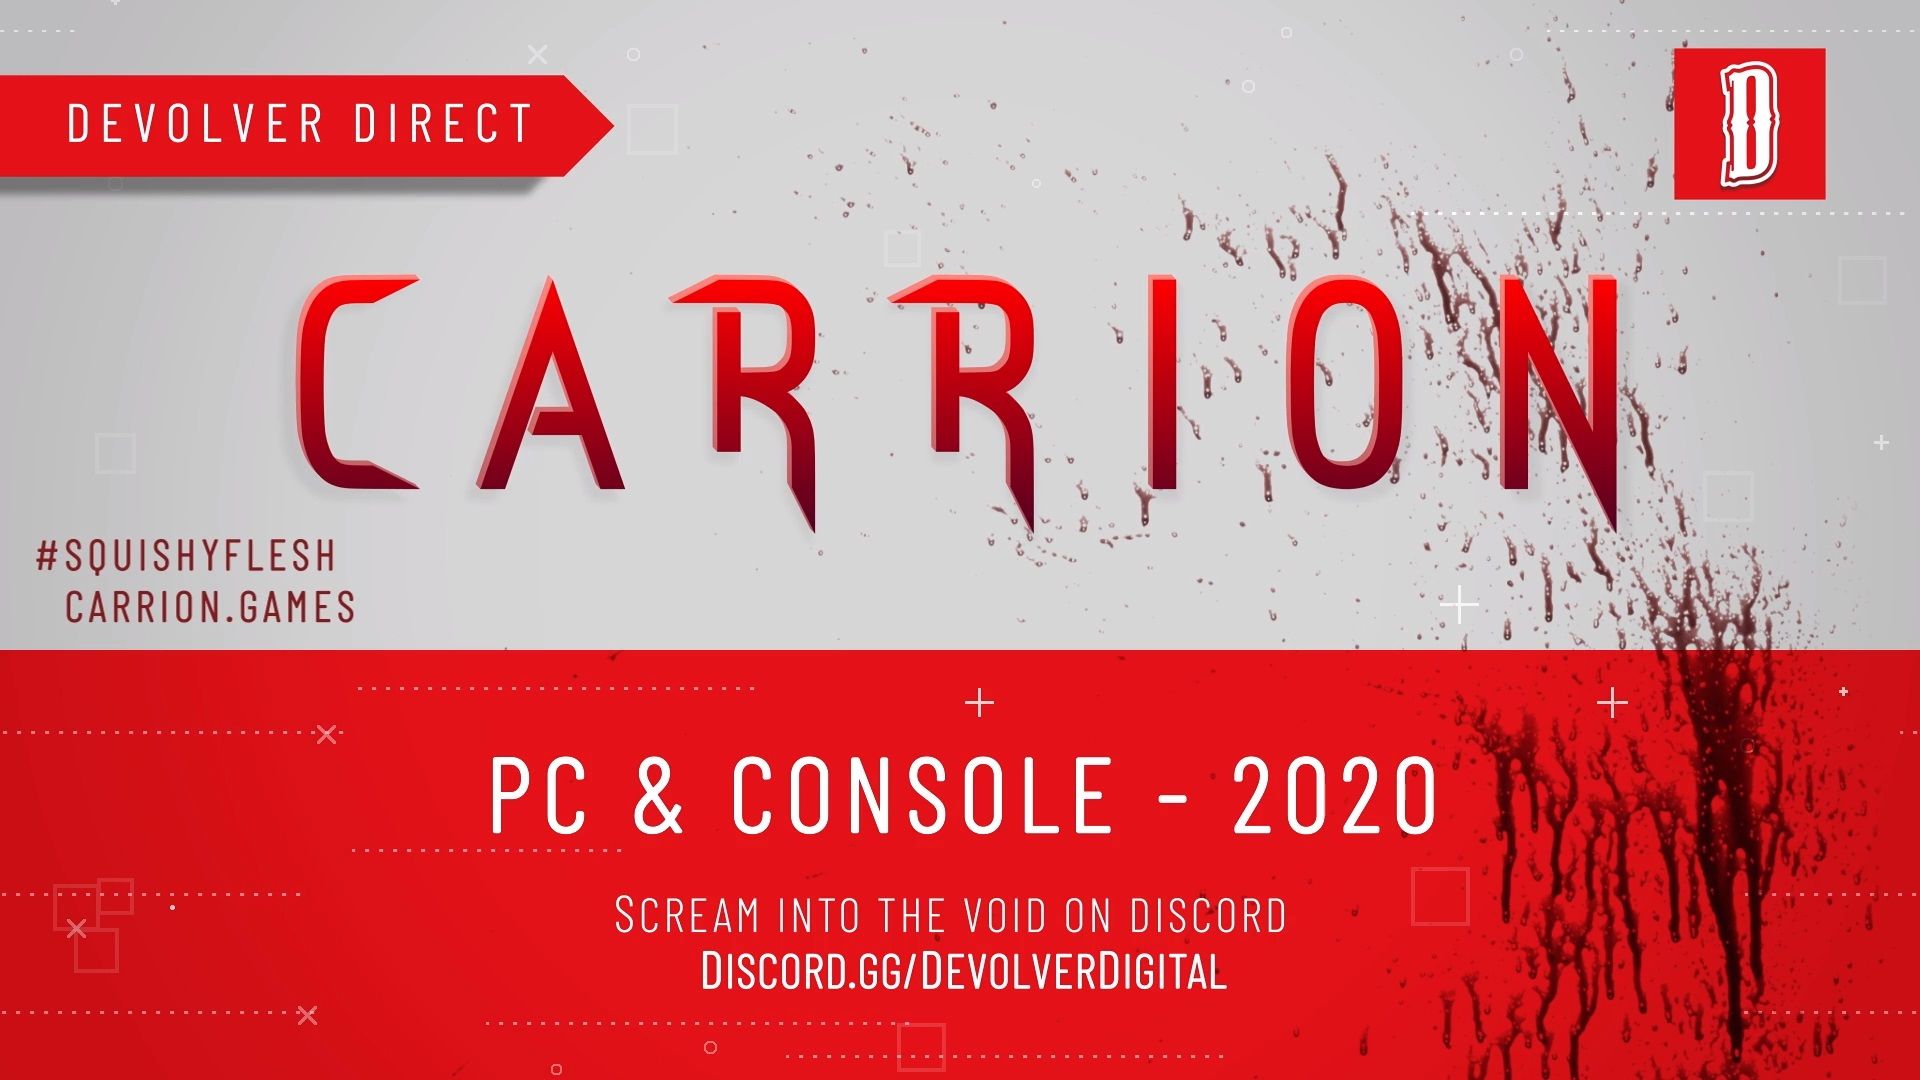 E3 Devolver Digital Carrion is coming to PC and Console